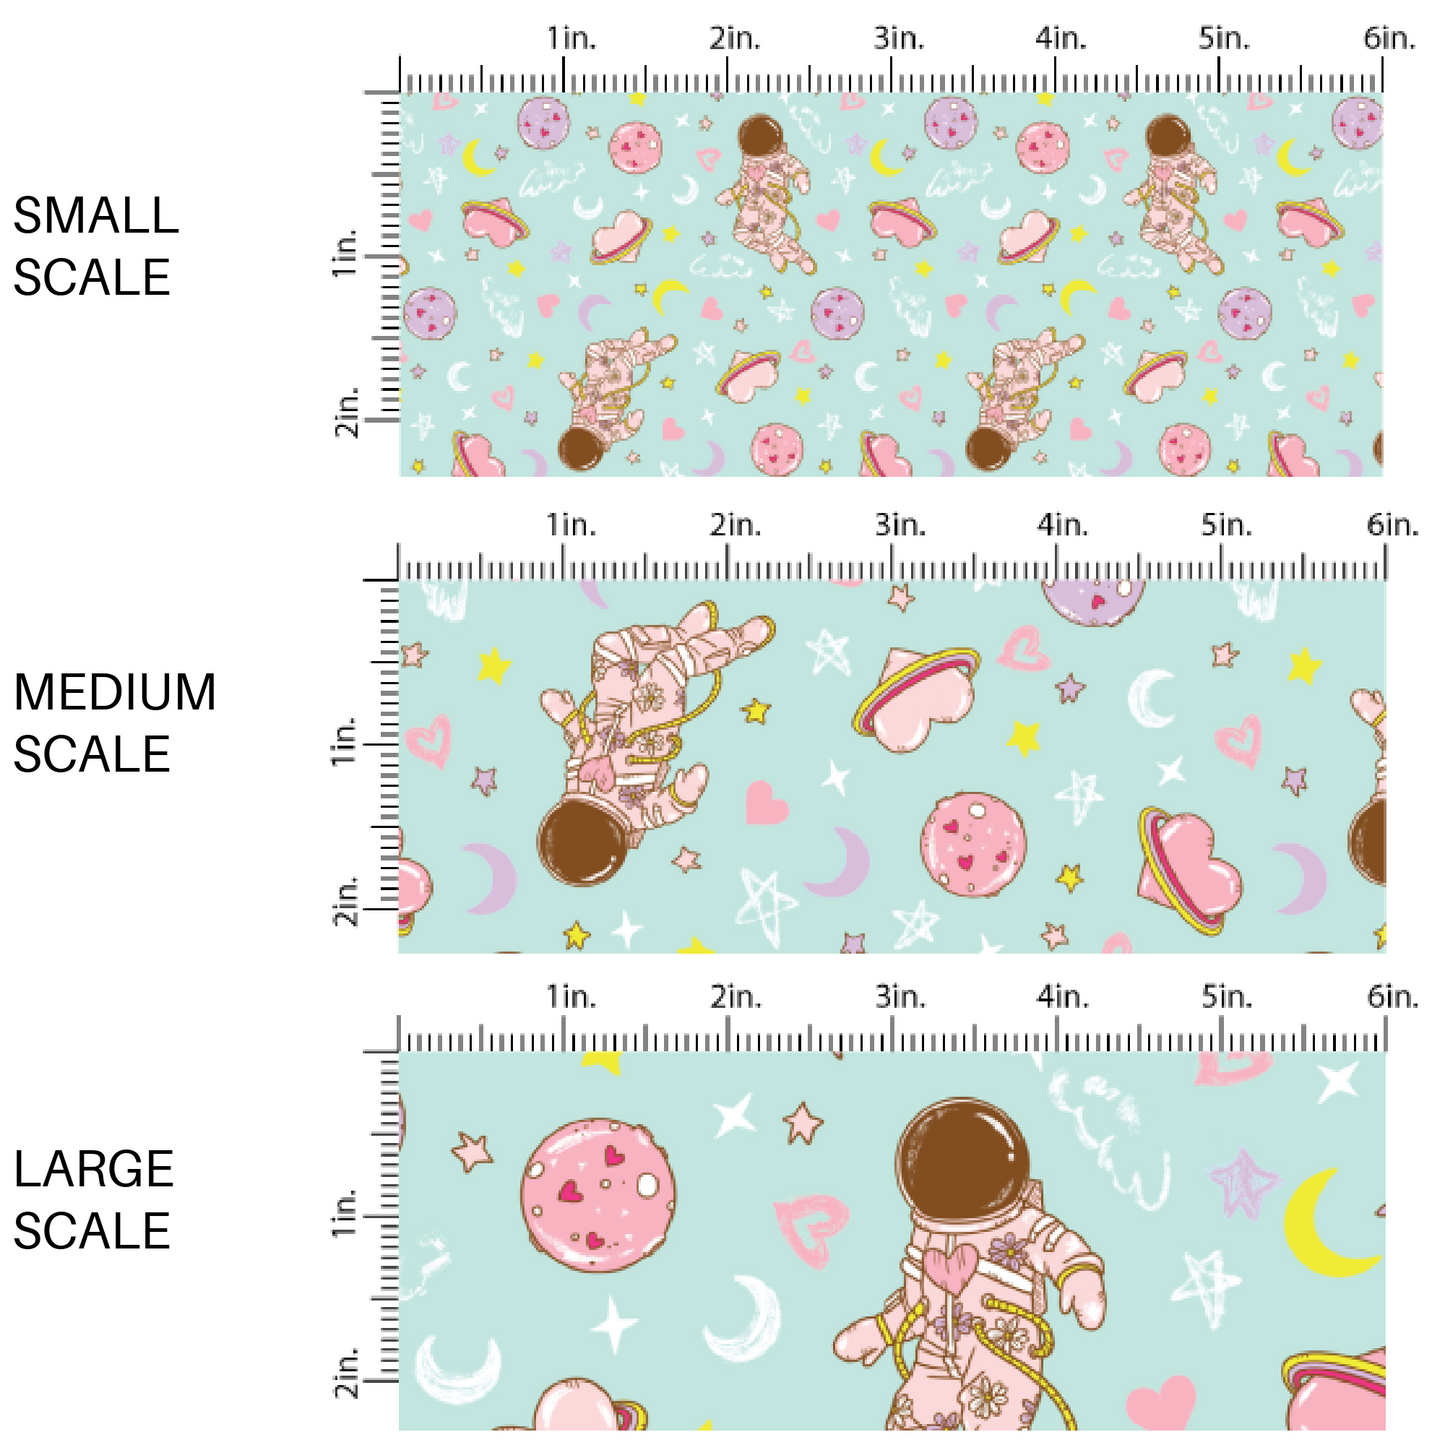 Aqua Pattern with hearts, astronauts, and planets fabric scaling sizes 